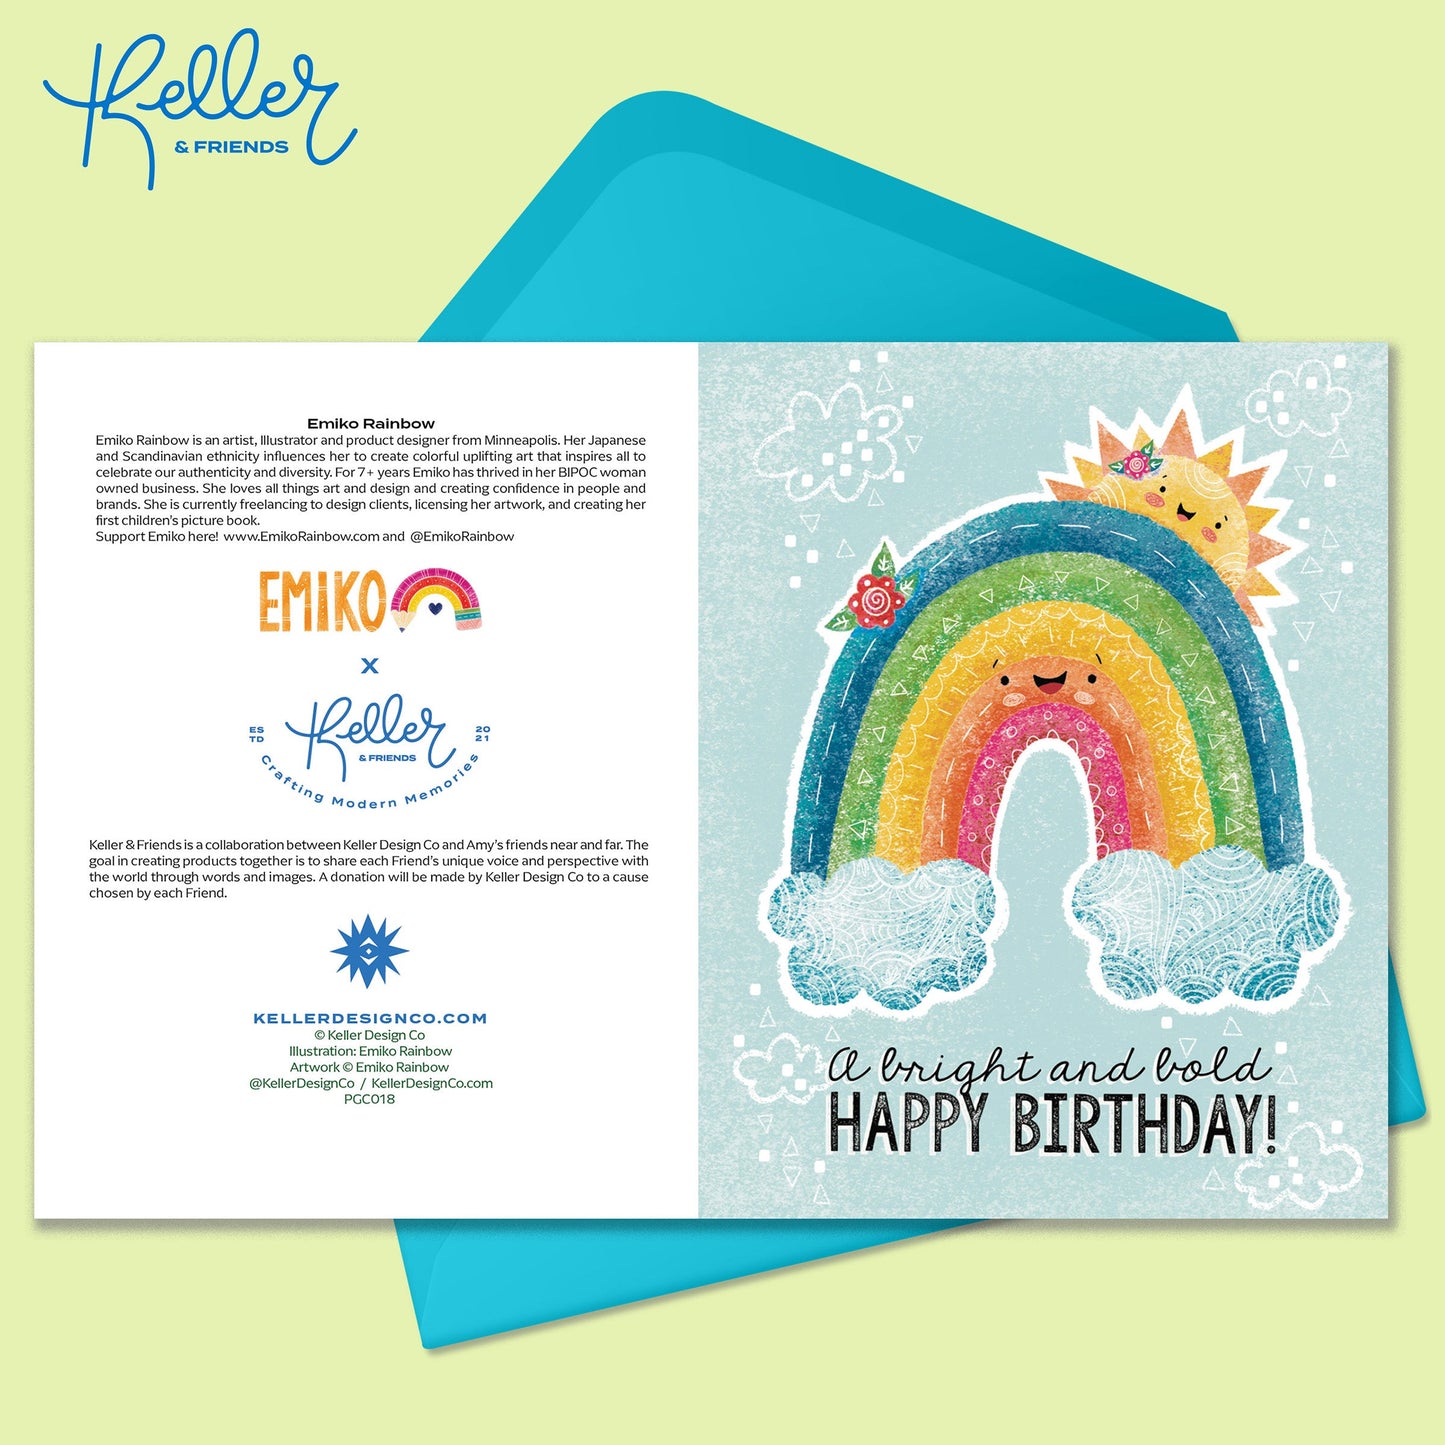 Greeting Card with a Smiling Rainbow and Sun with text that says A Bright and Bold Happy Birthday. There is a turquoise envelope on a lime green background